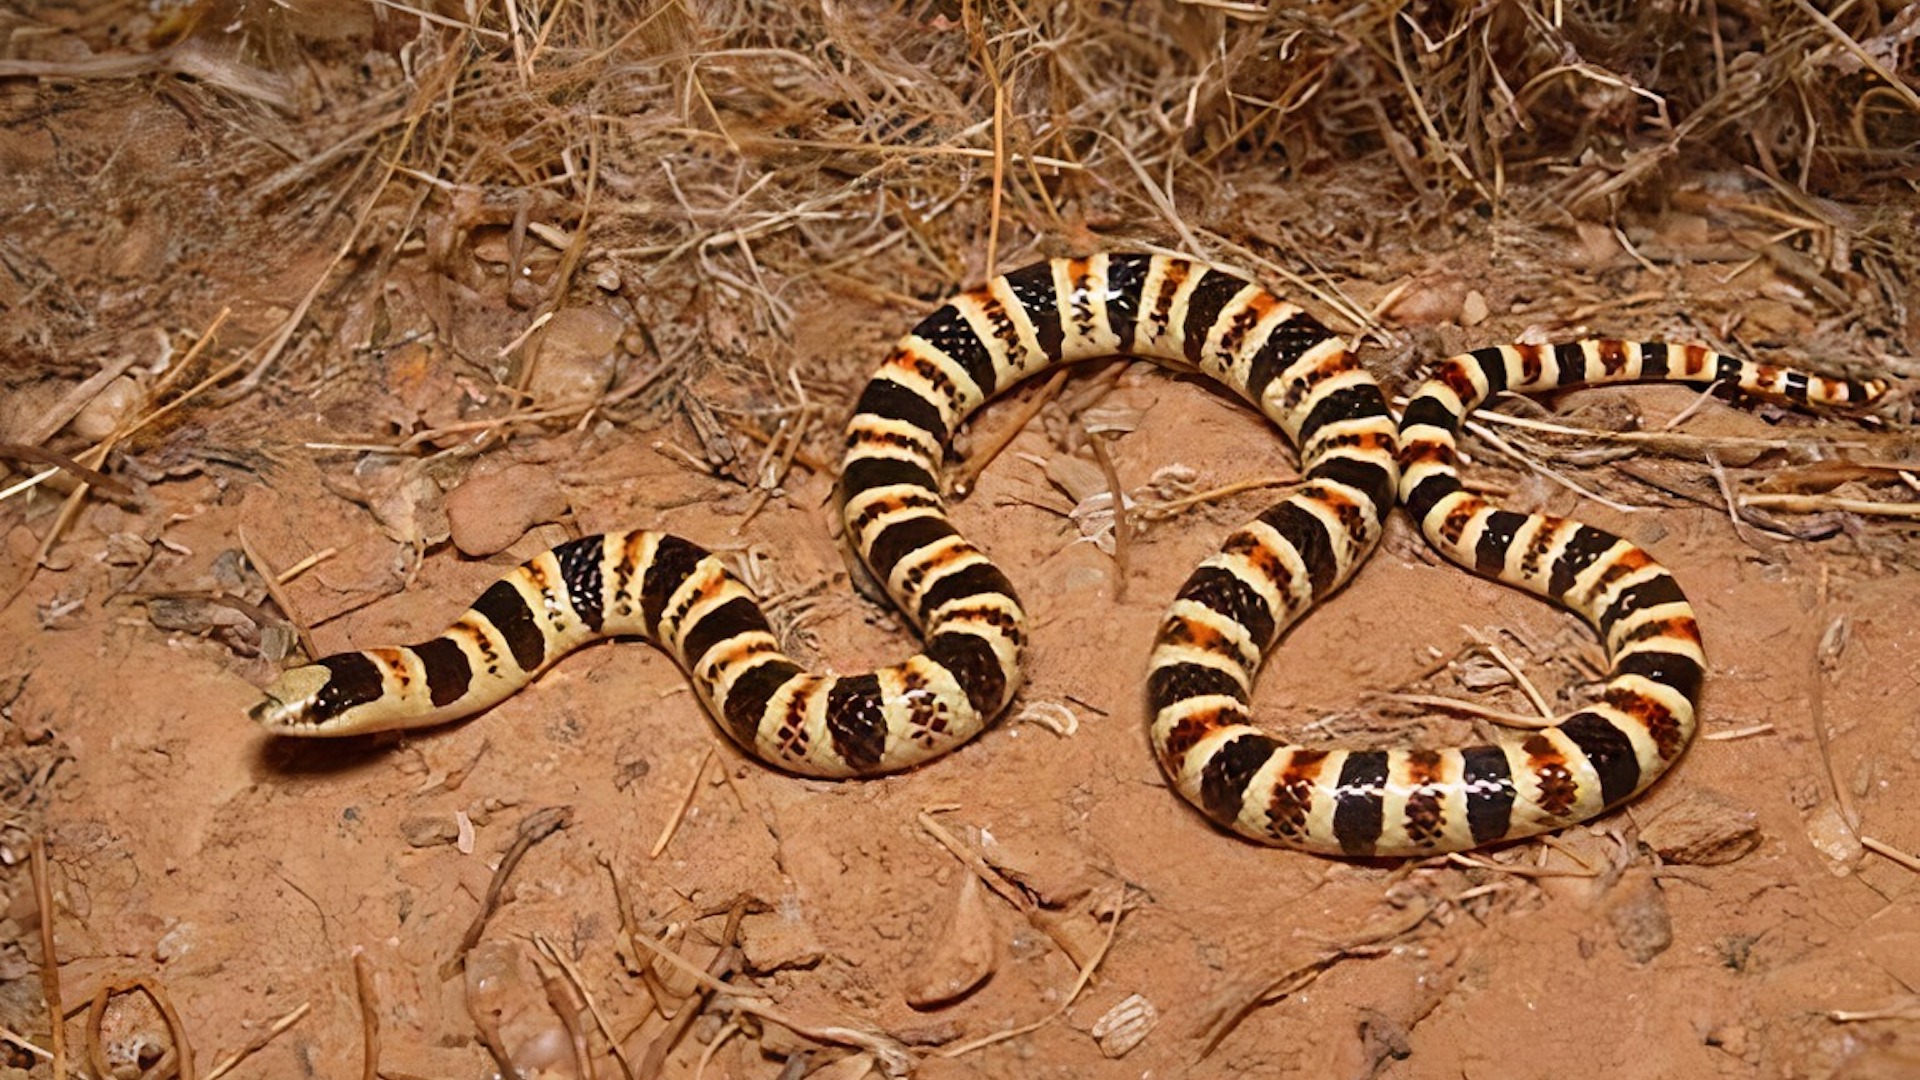 Tucson shovel-nosed snake needs Endangered Species Act protection, group  argues - AZPM